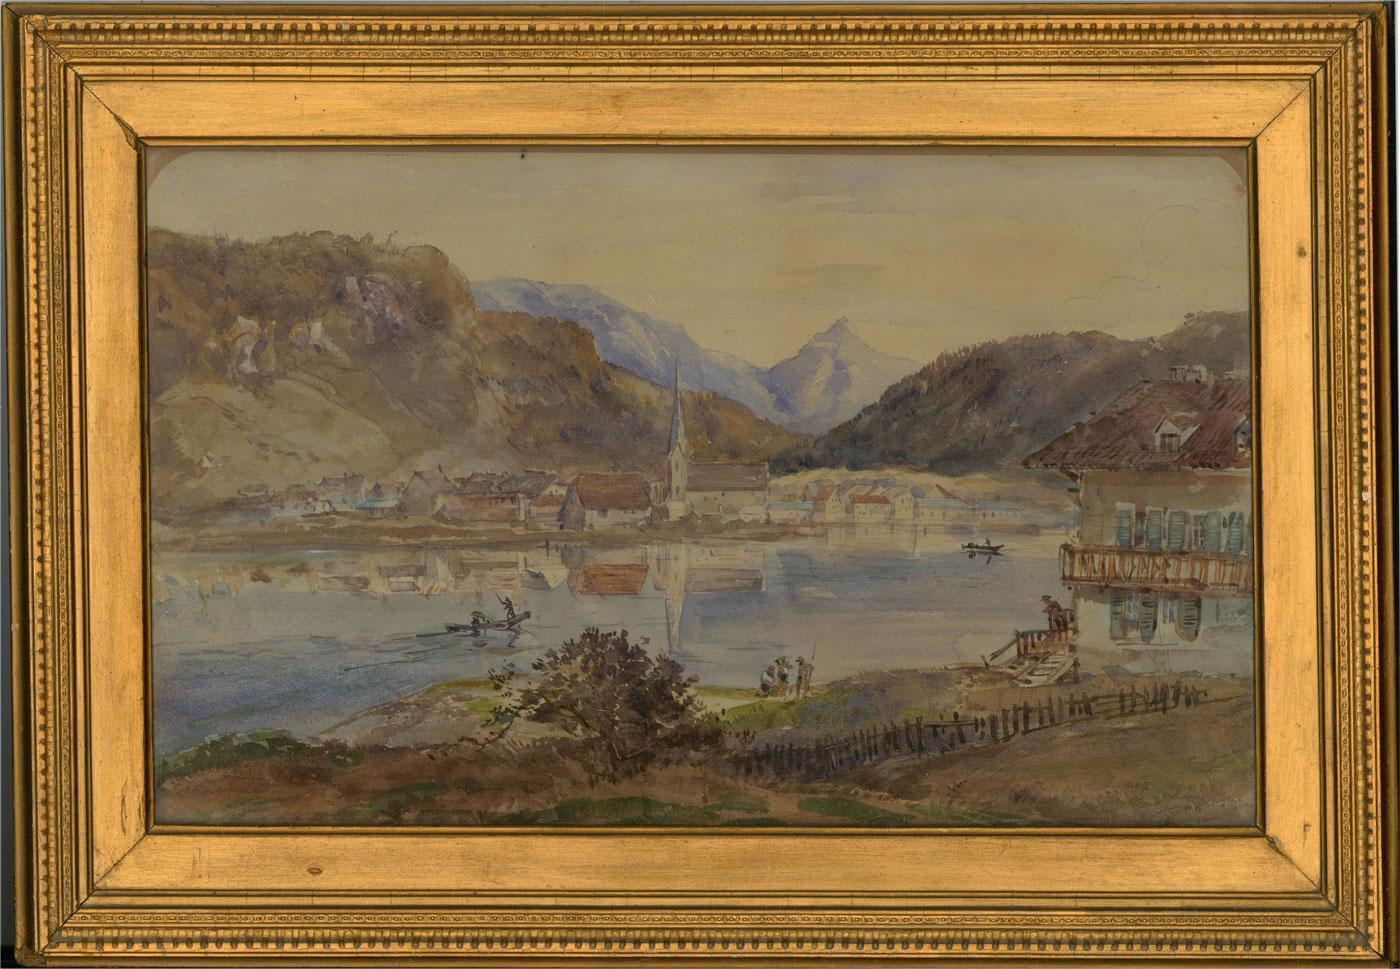 A charming Alpine watercolour showing a pretty town, nestled in the valley of the great mountains beside a clear lake. A chalet can be seen to the right in the foreground with people fishing out front. The painting is unsigned and presented in a